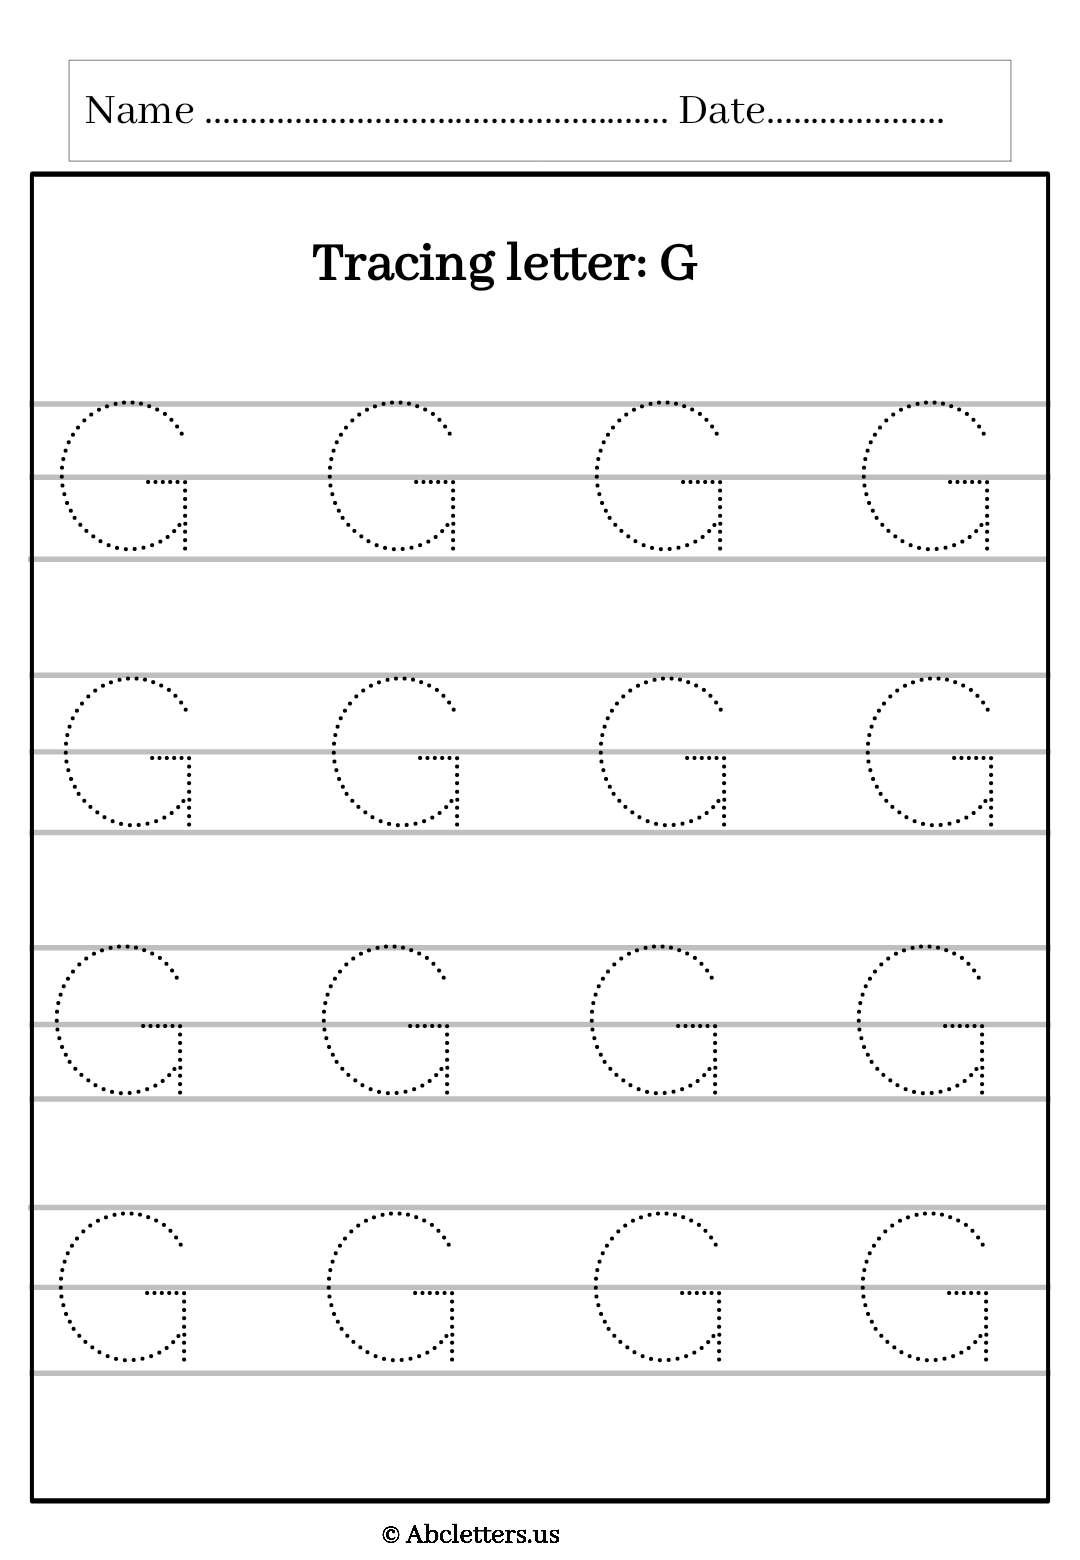 Tracing letter uppercase G with 3 line